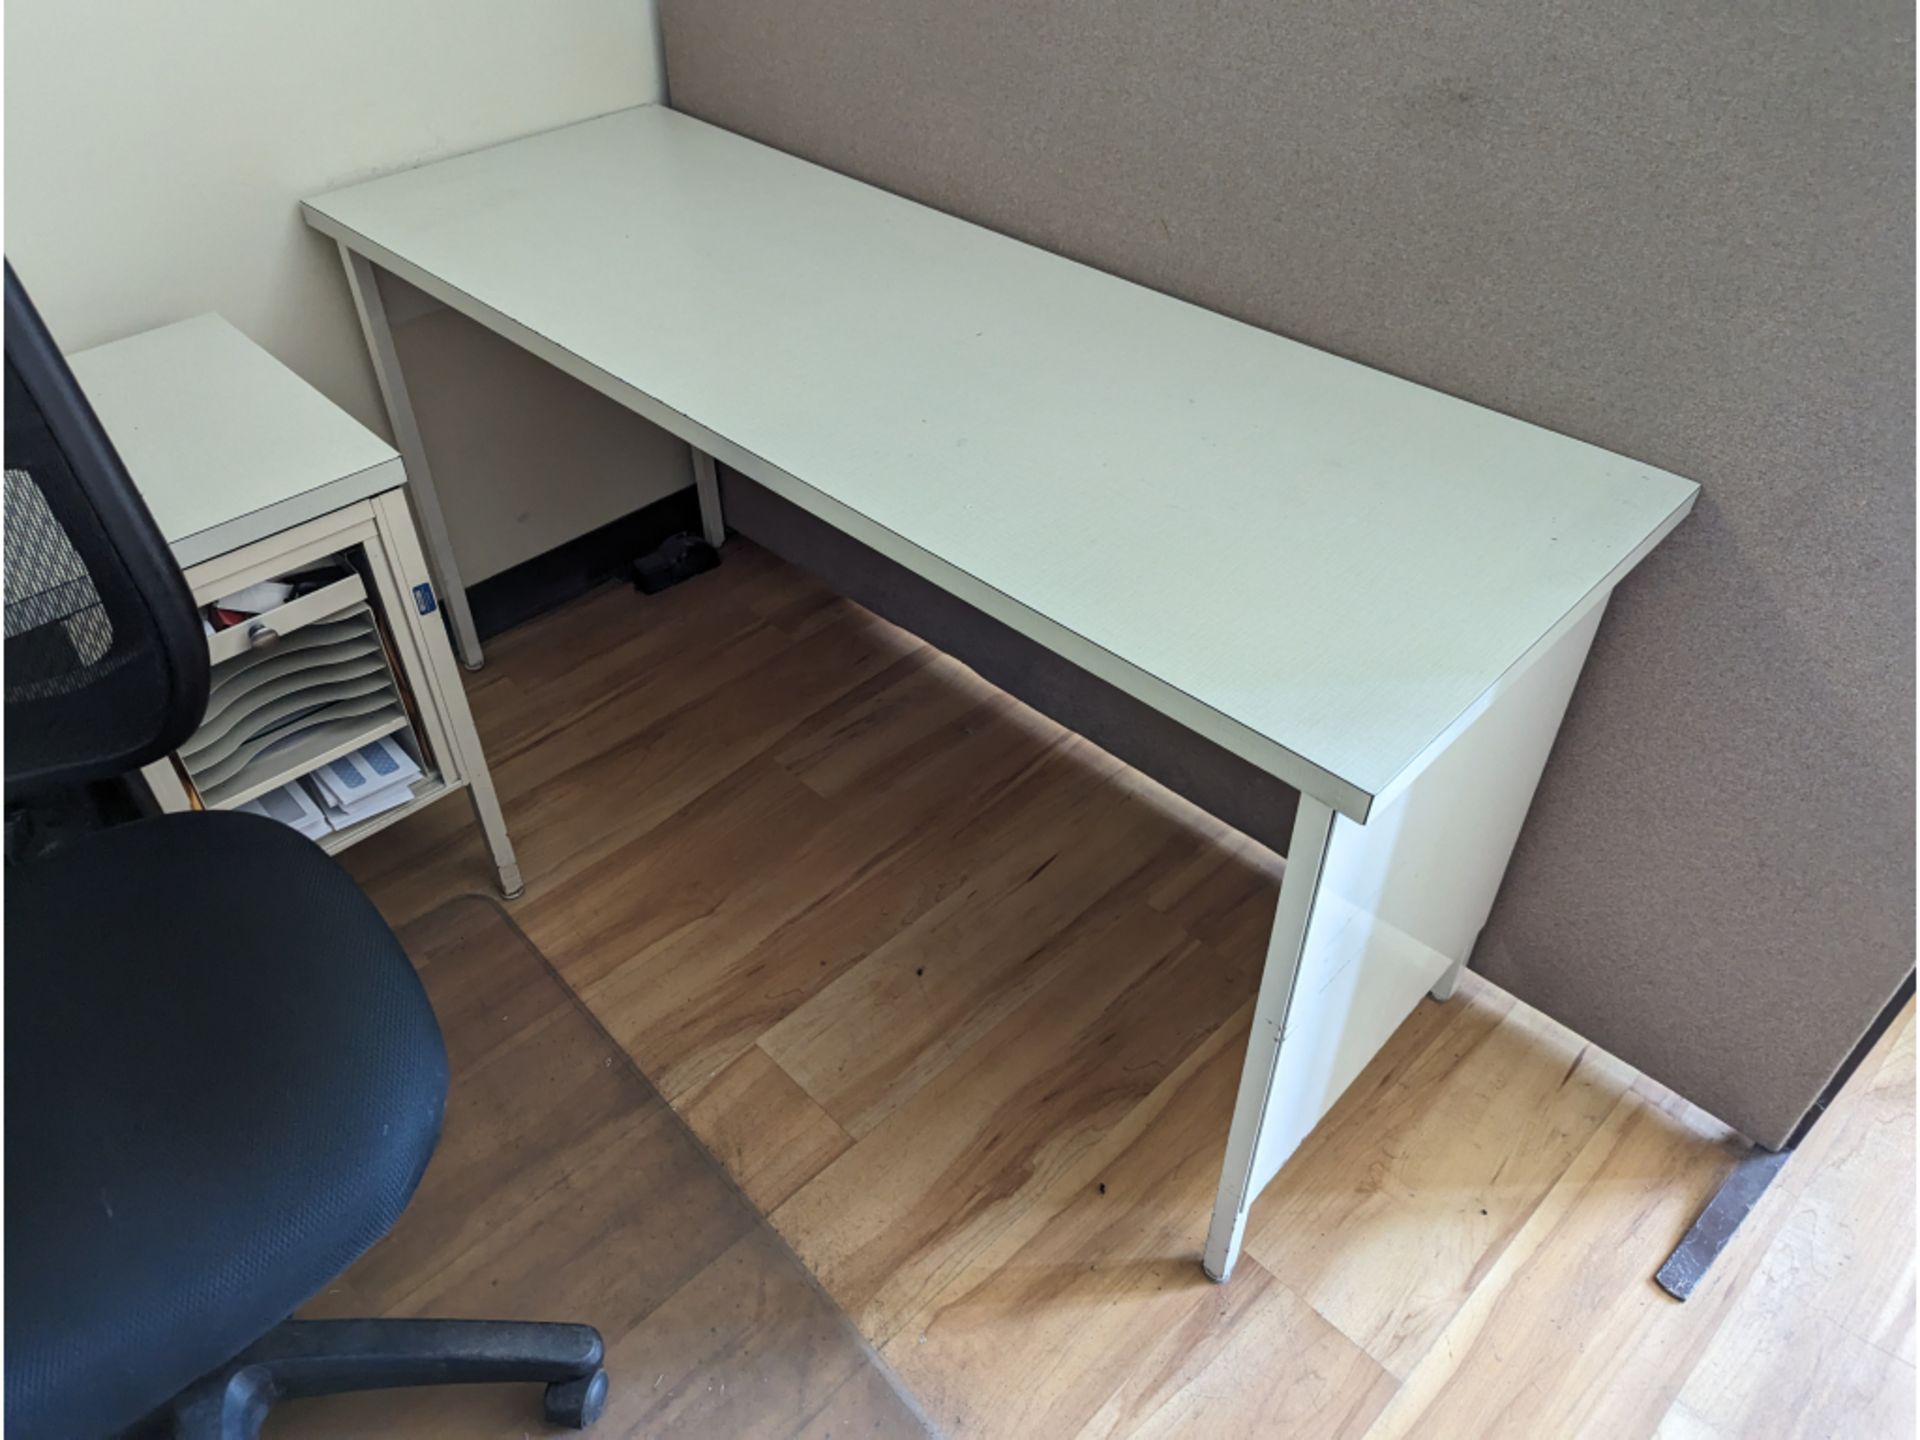 Office Furniture - Desks, Chair, - Image 2 of 2